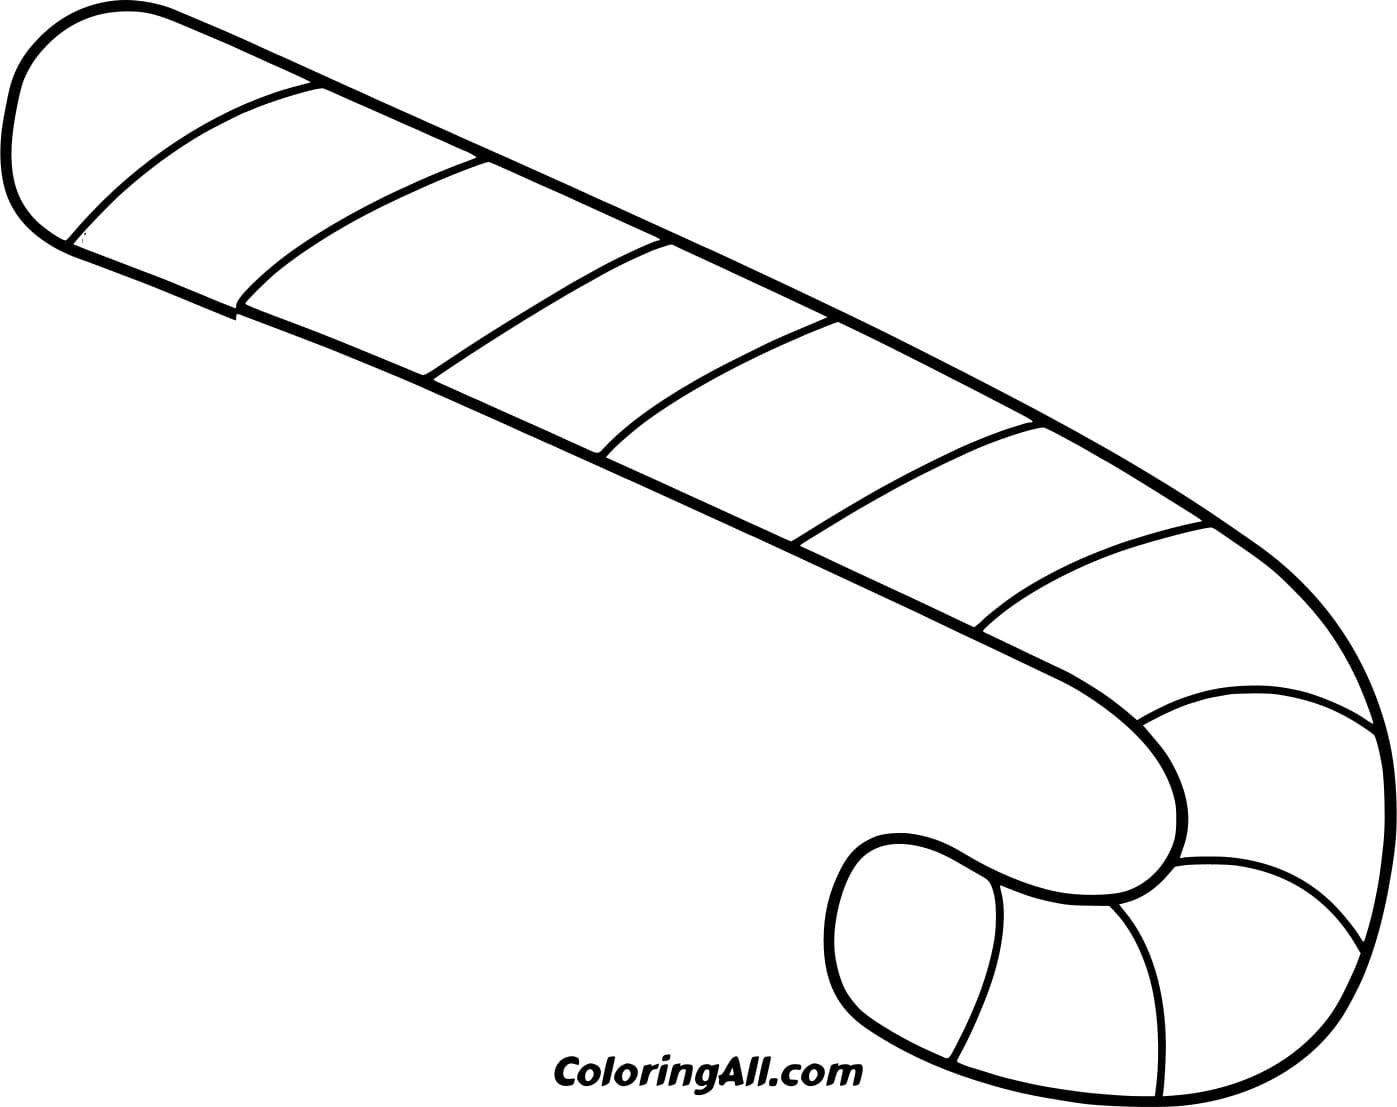 Simple Sideways Candy Cane Image For Kids